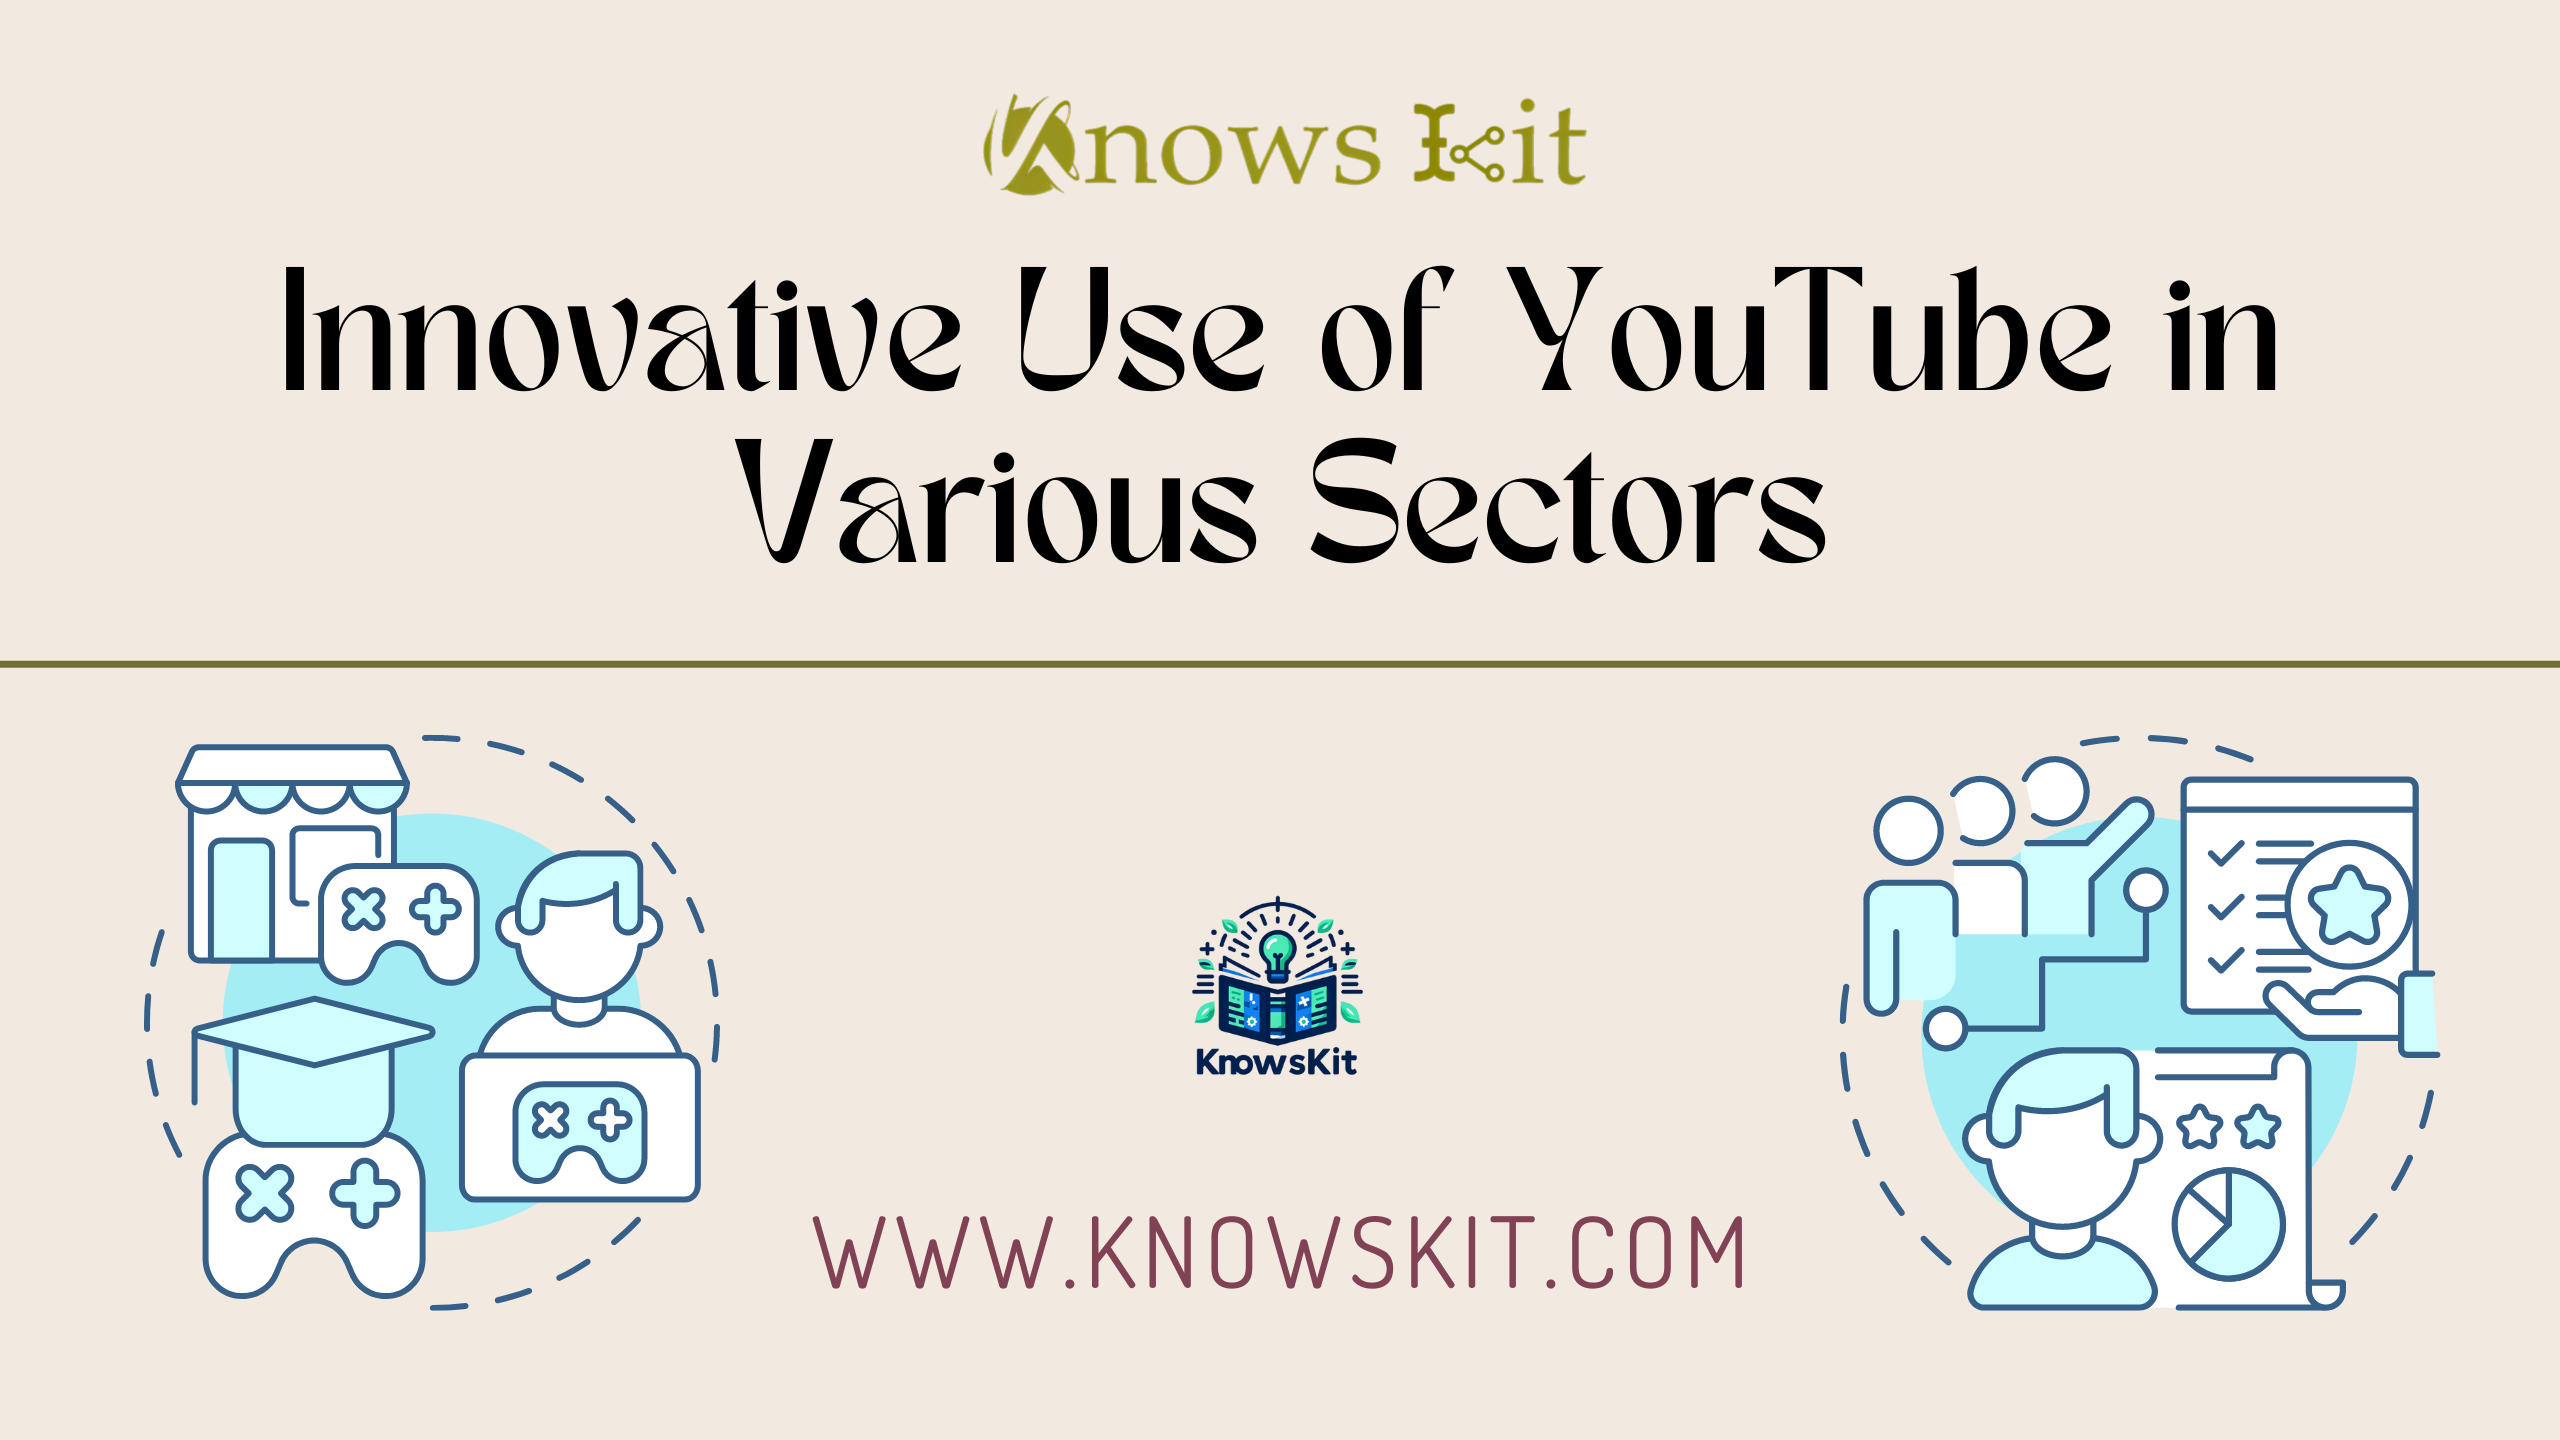 Innovative Use of YouTube in Various Sectors